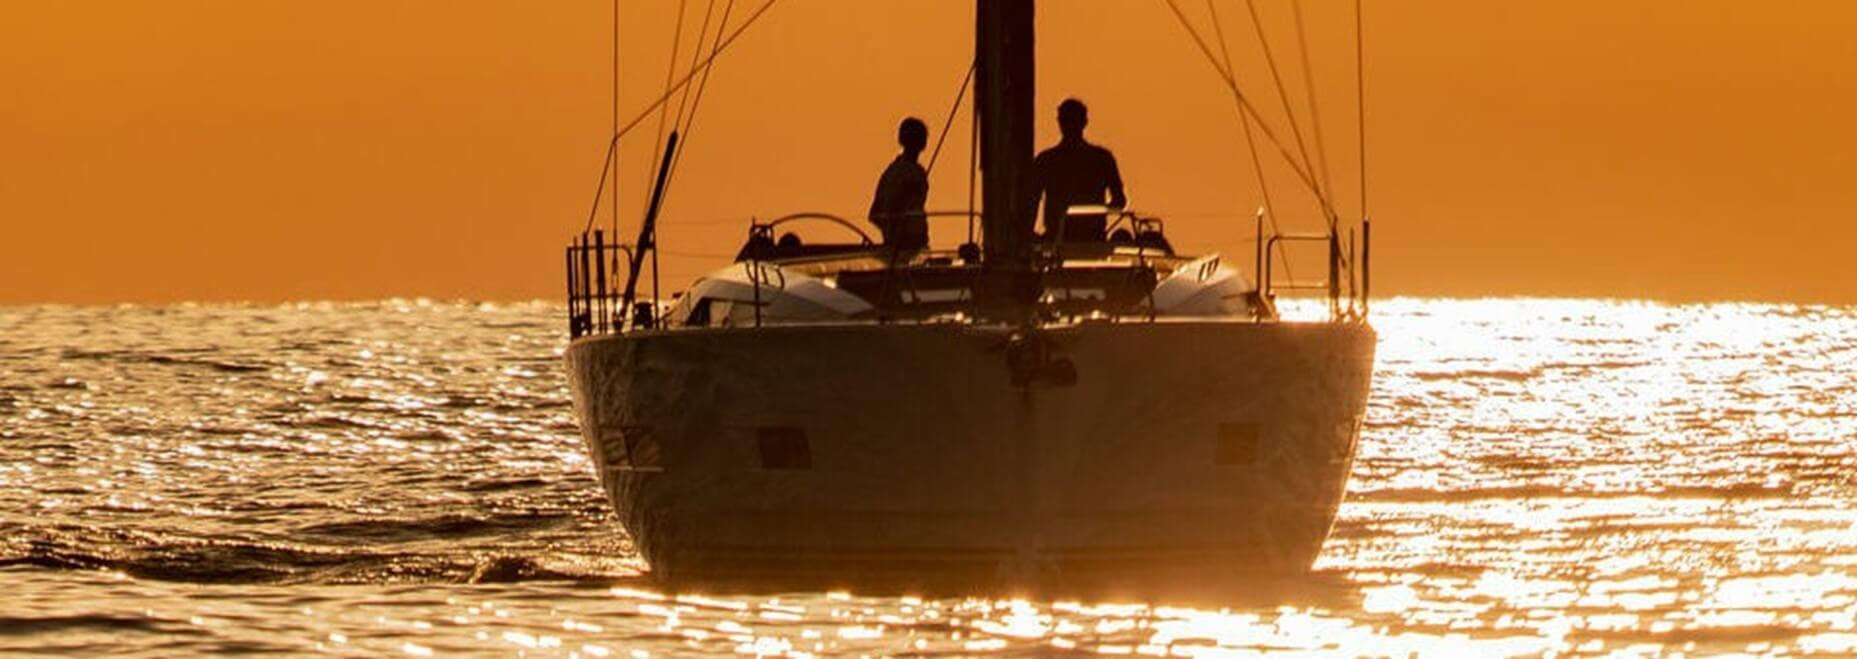 Hanse 460 sailing yacht on the water with a orange horizon